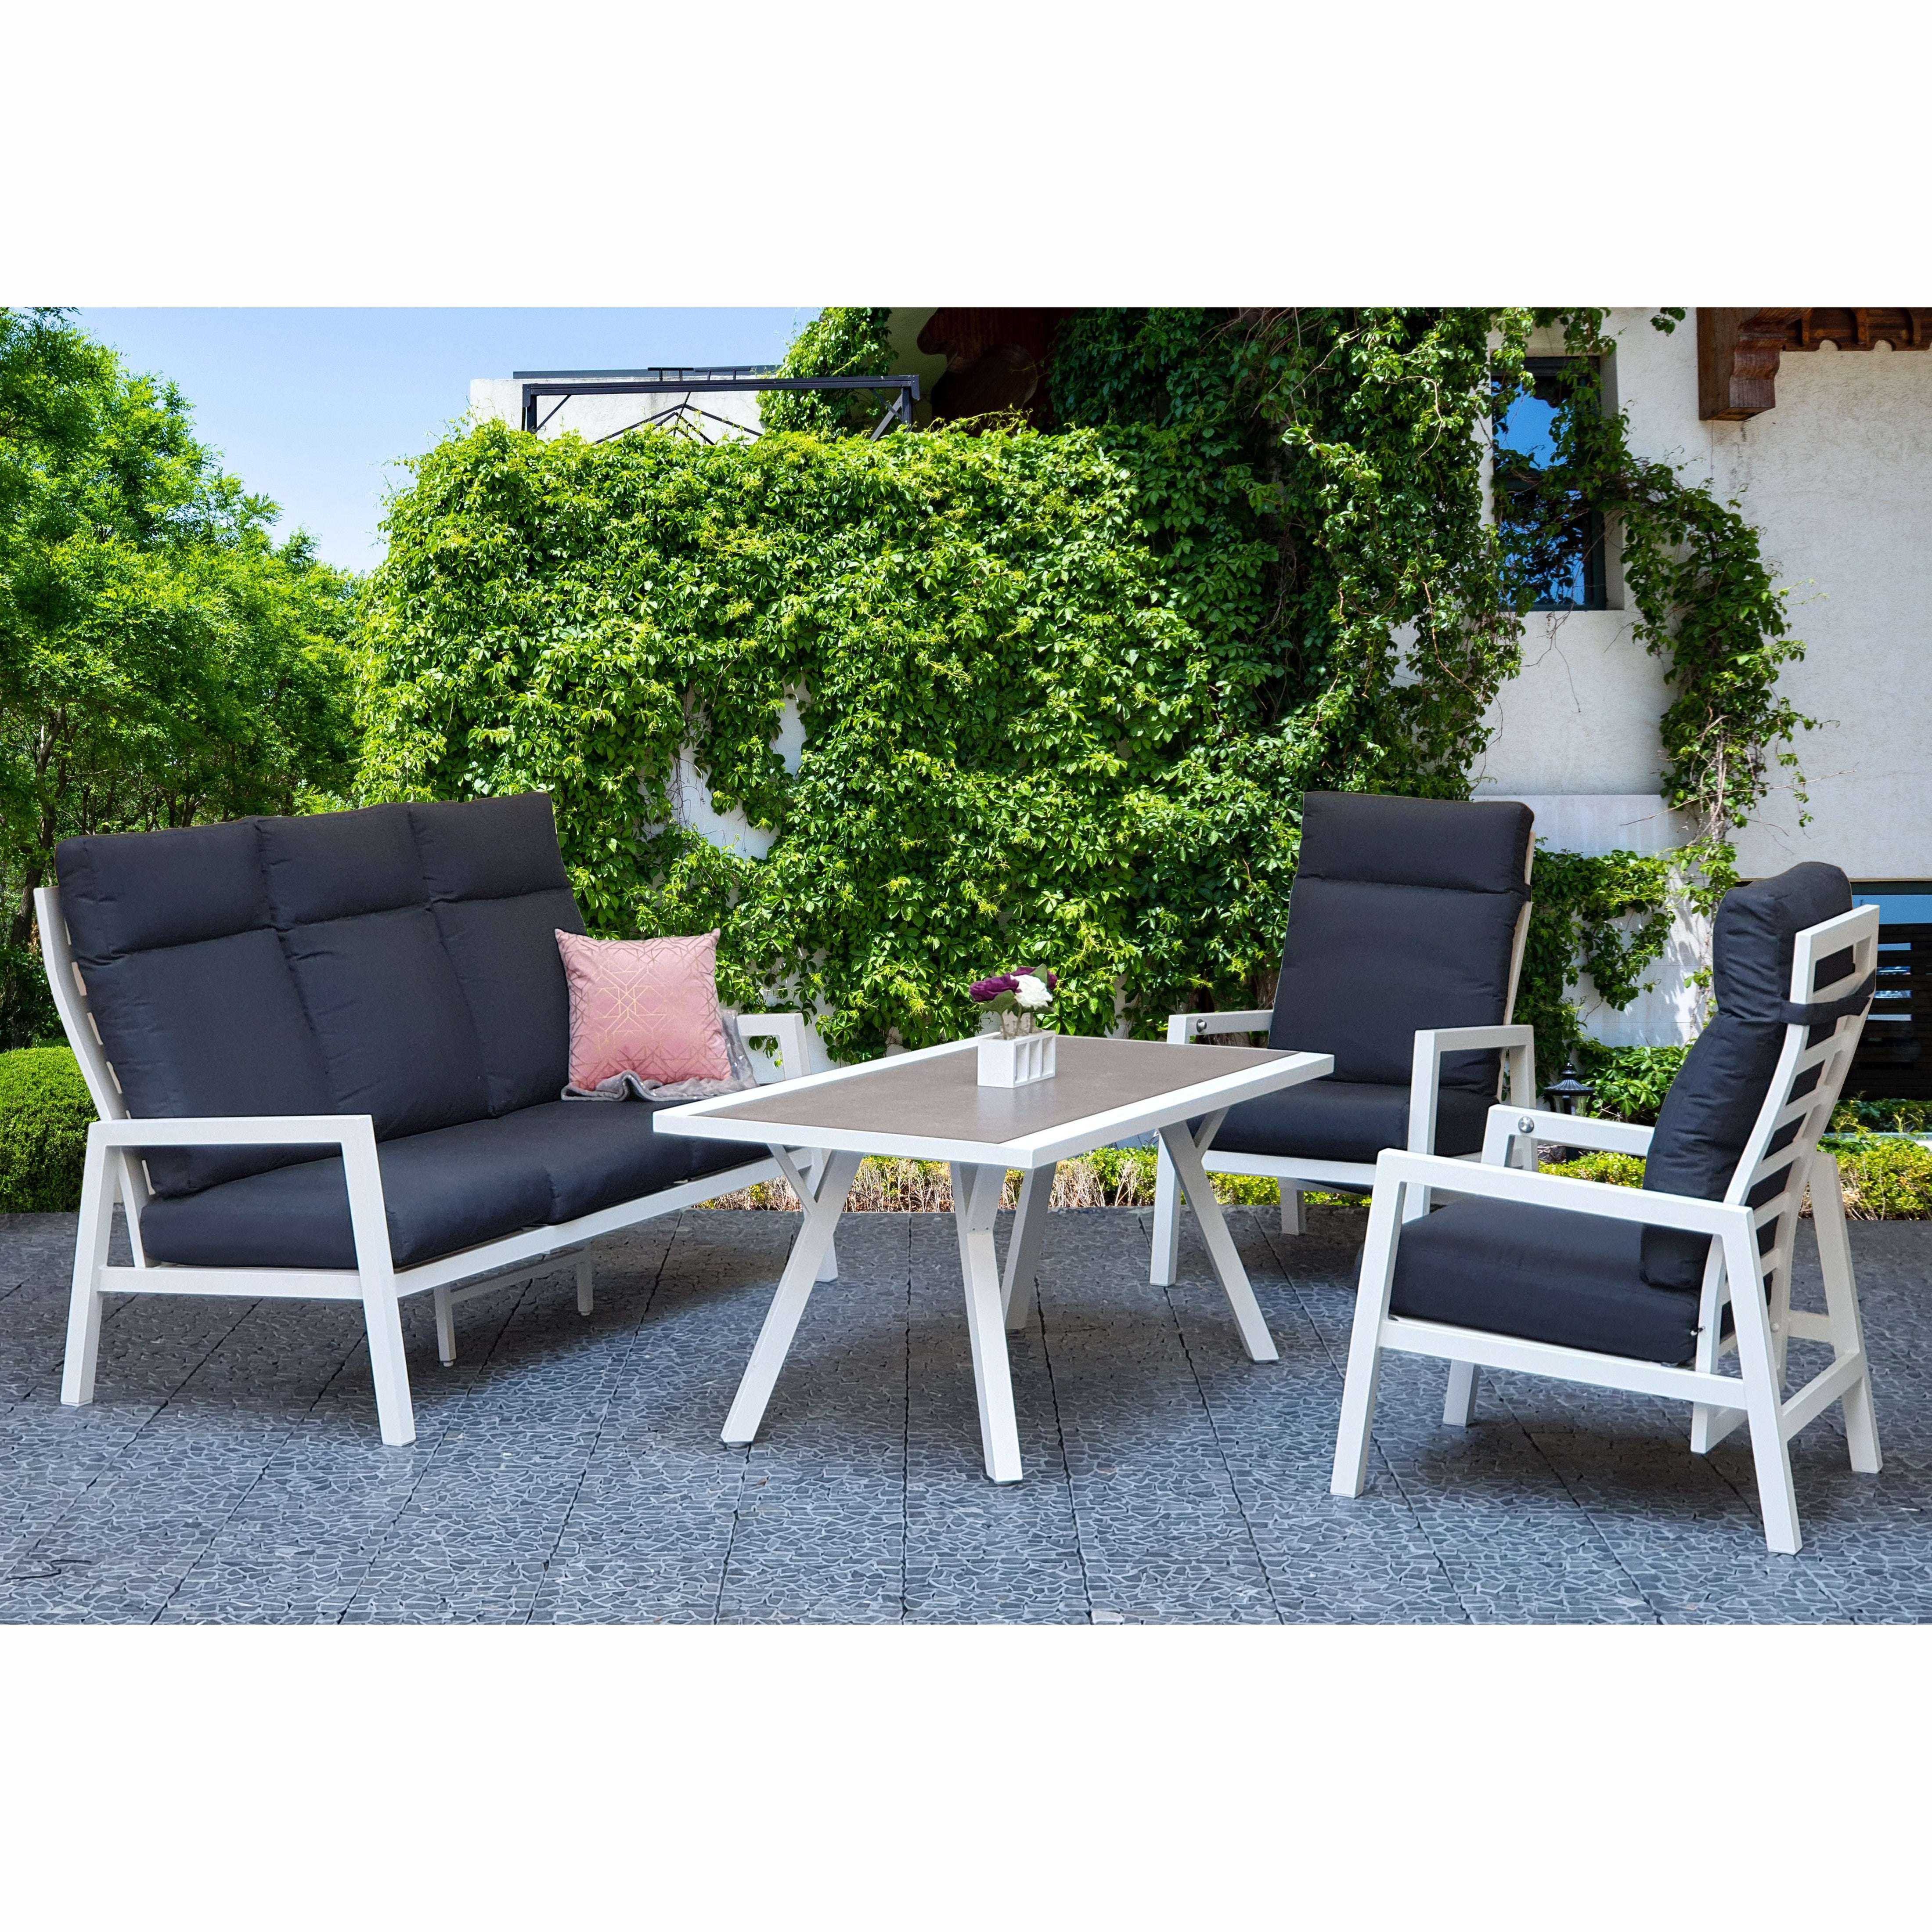 Exceptional Garden:Signature Weave Kimmie 5-Seater Dining Set with High Back Sofa